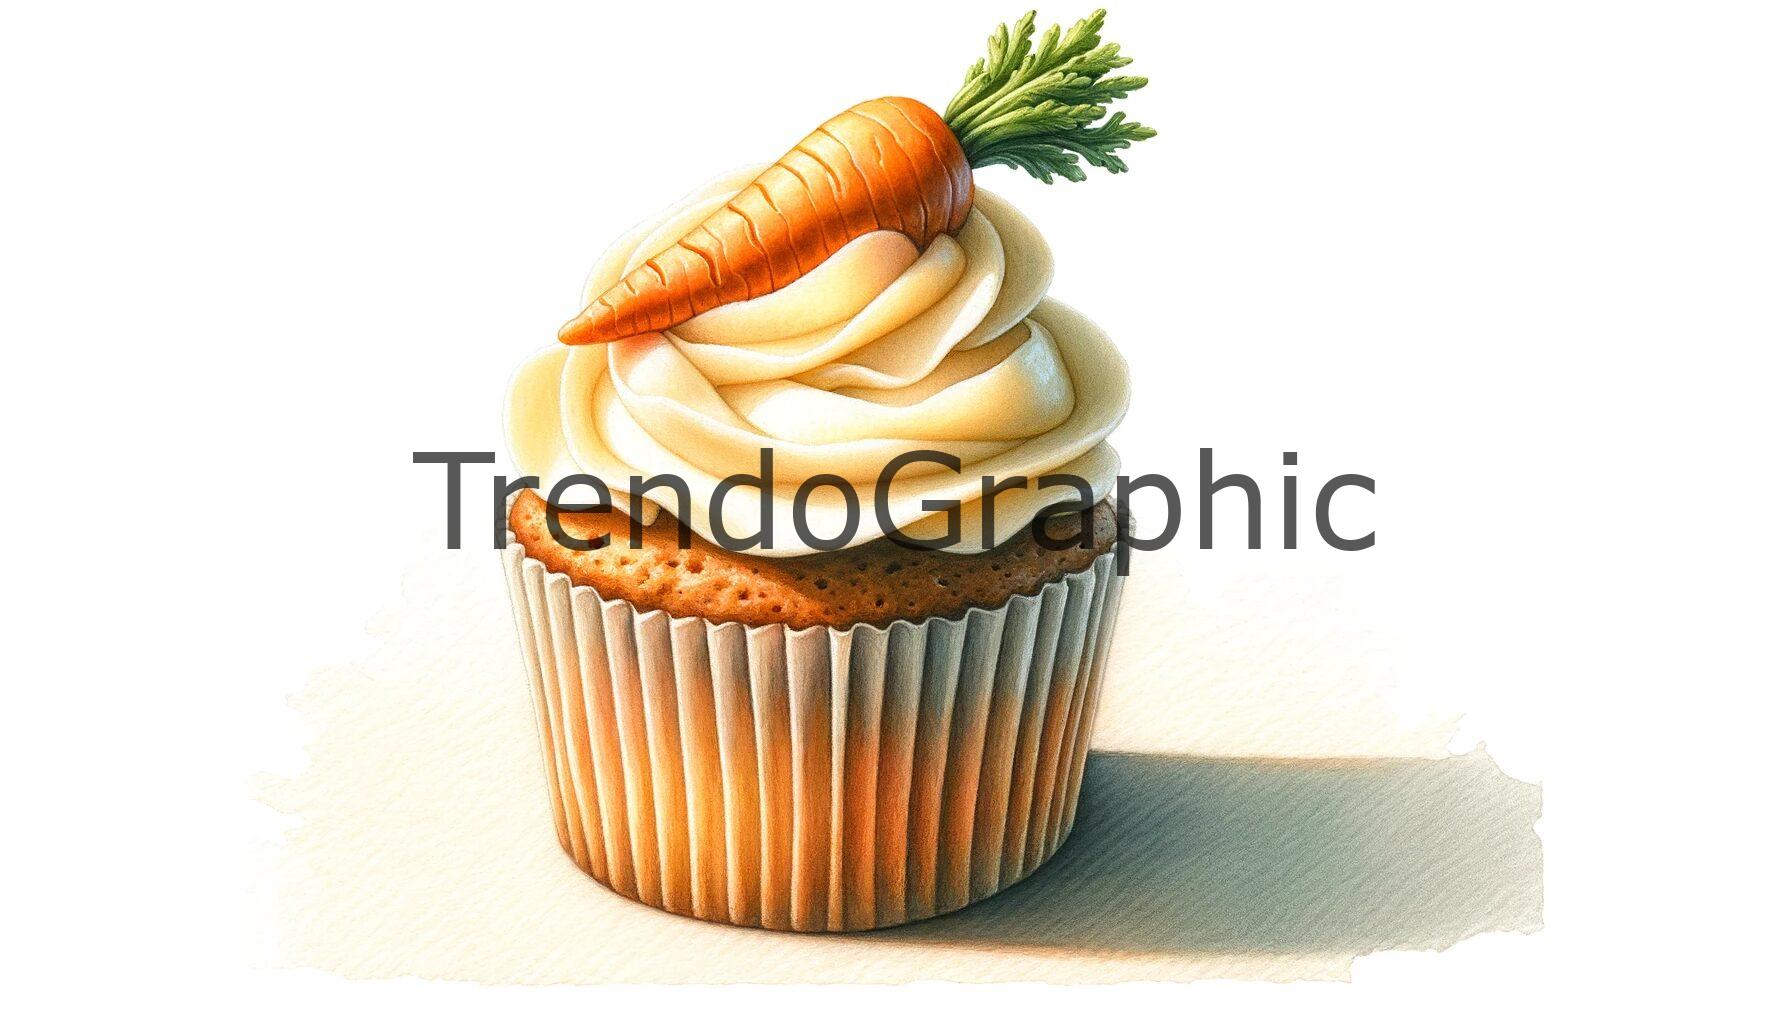 Artistic Carrot Cake Cupcake with Creamy Frosting and Marzipan Detail